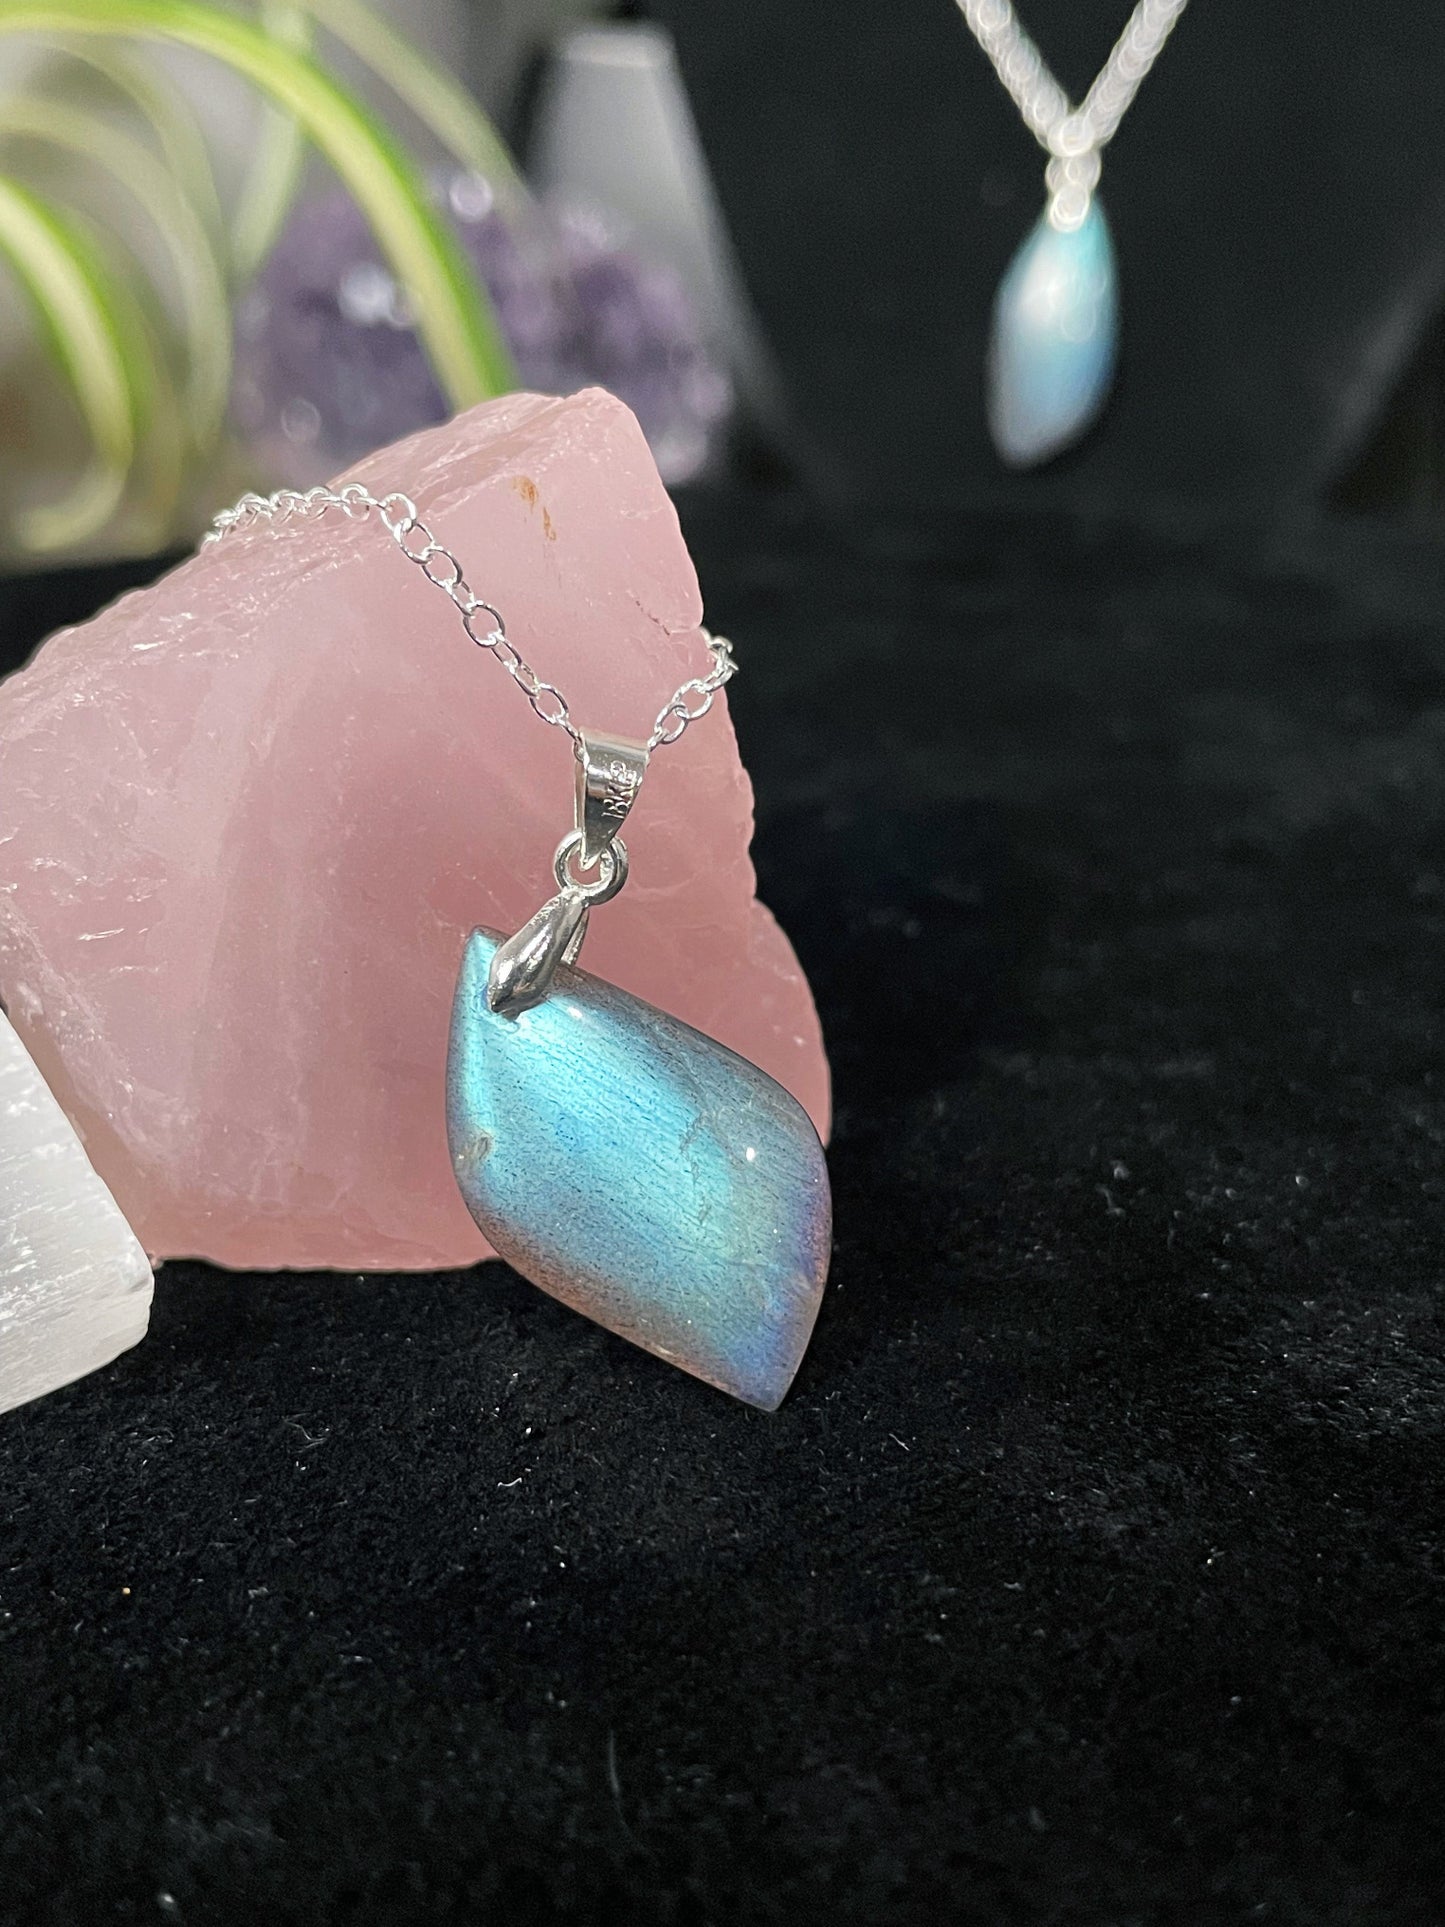 An image of a high-quality blue flash labradorite leaf shaped pendant on a necklace. It sits atop some selenite chunks and a black velvet surface.